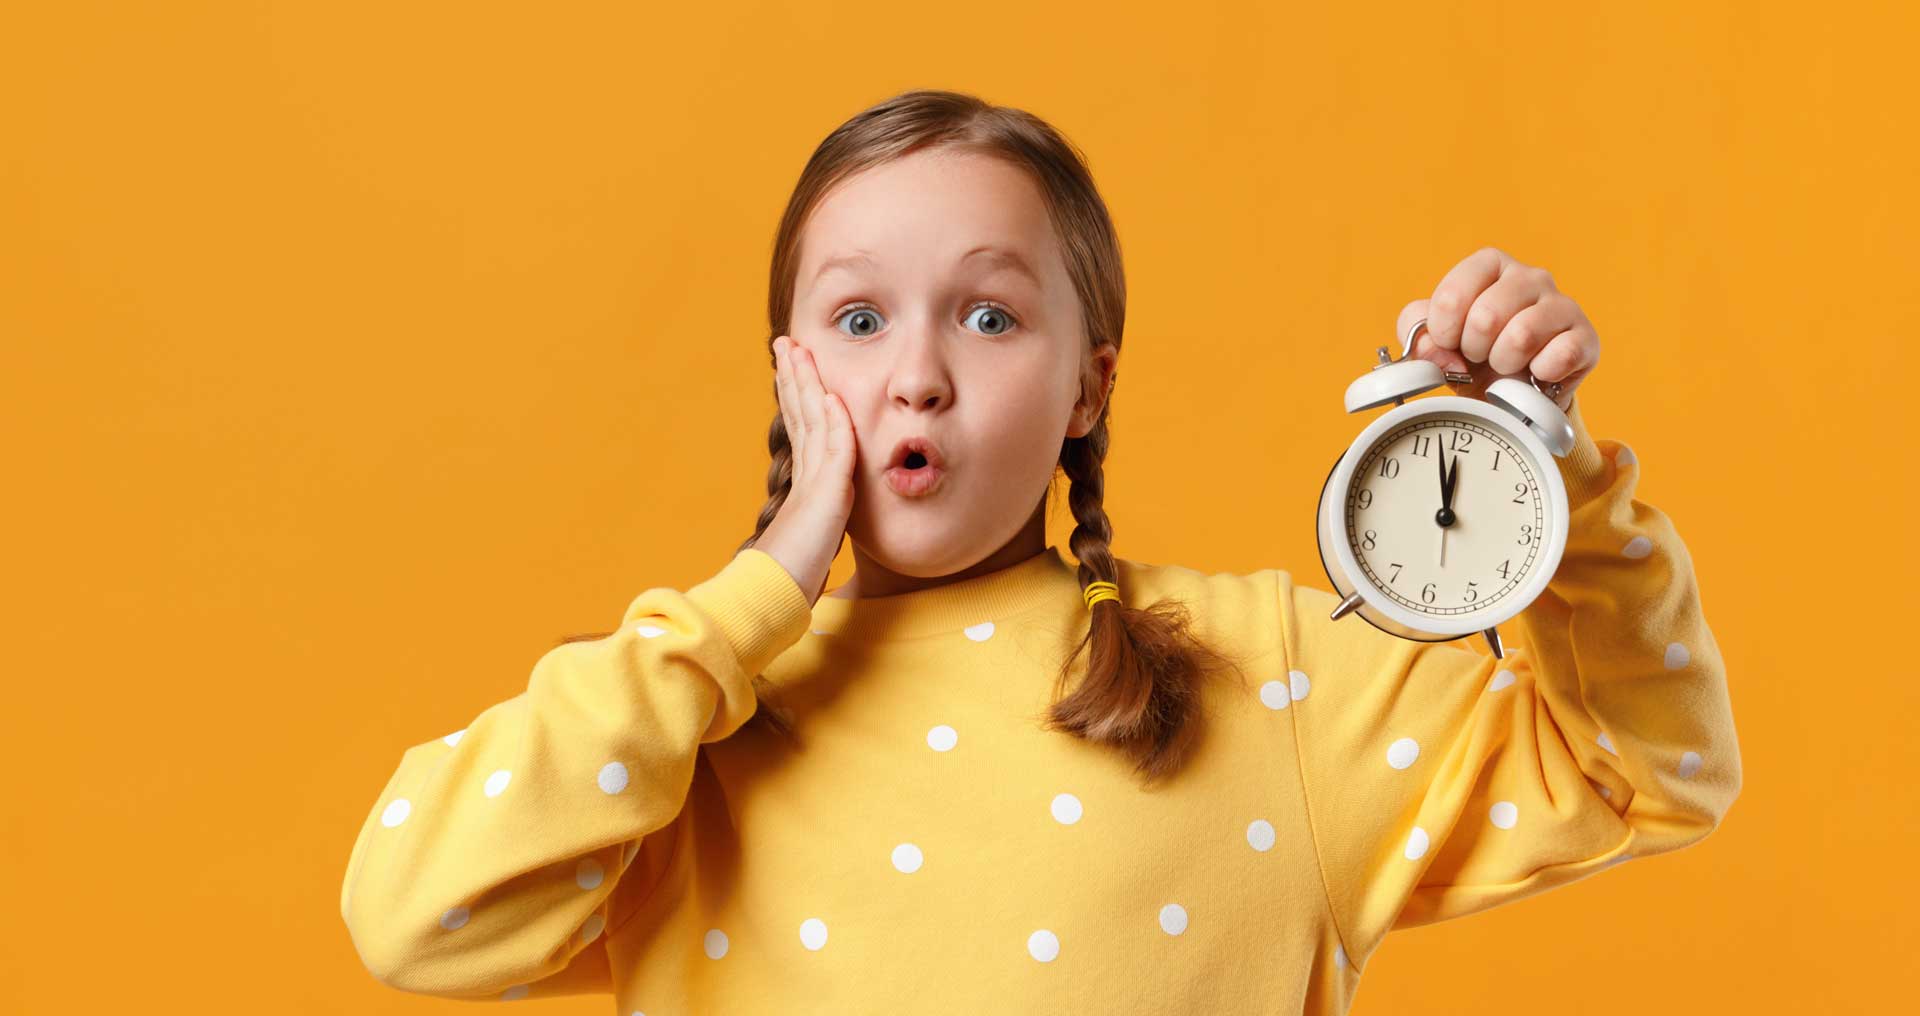 A girl holding an analogue alarm clock looking fake-shocked